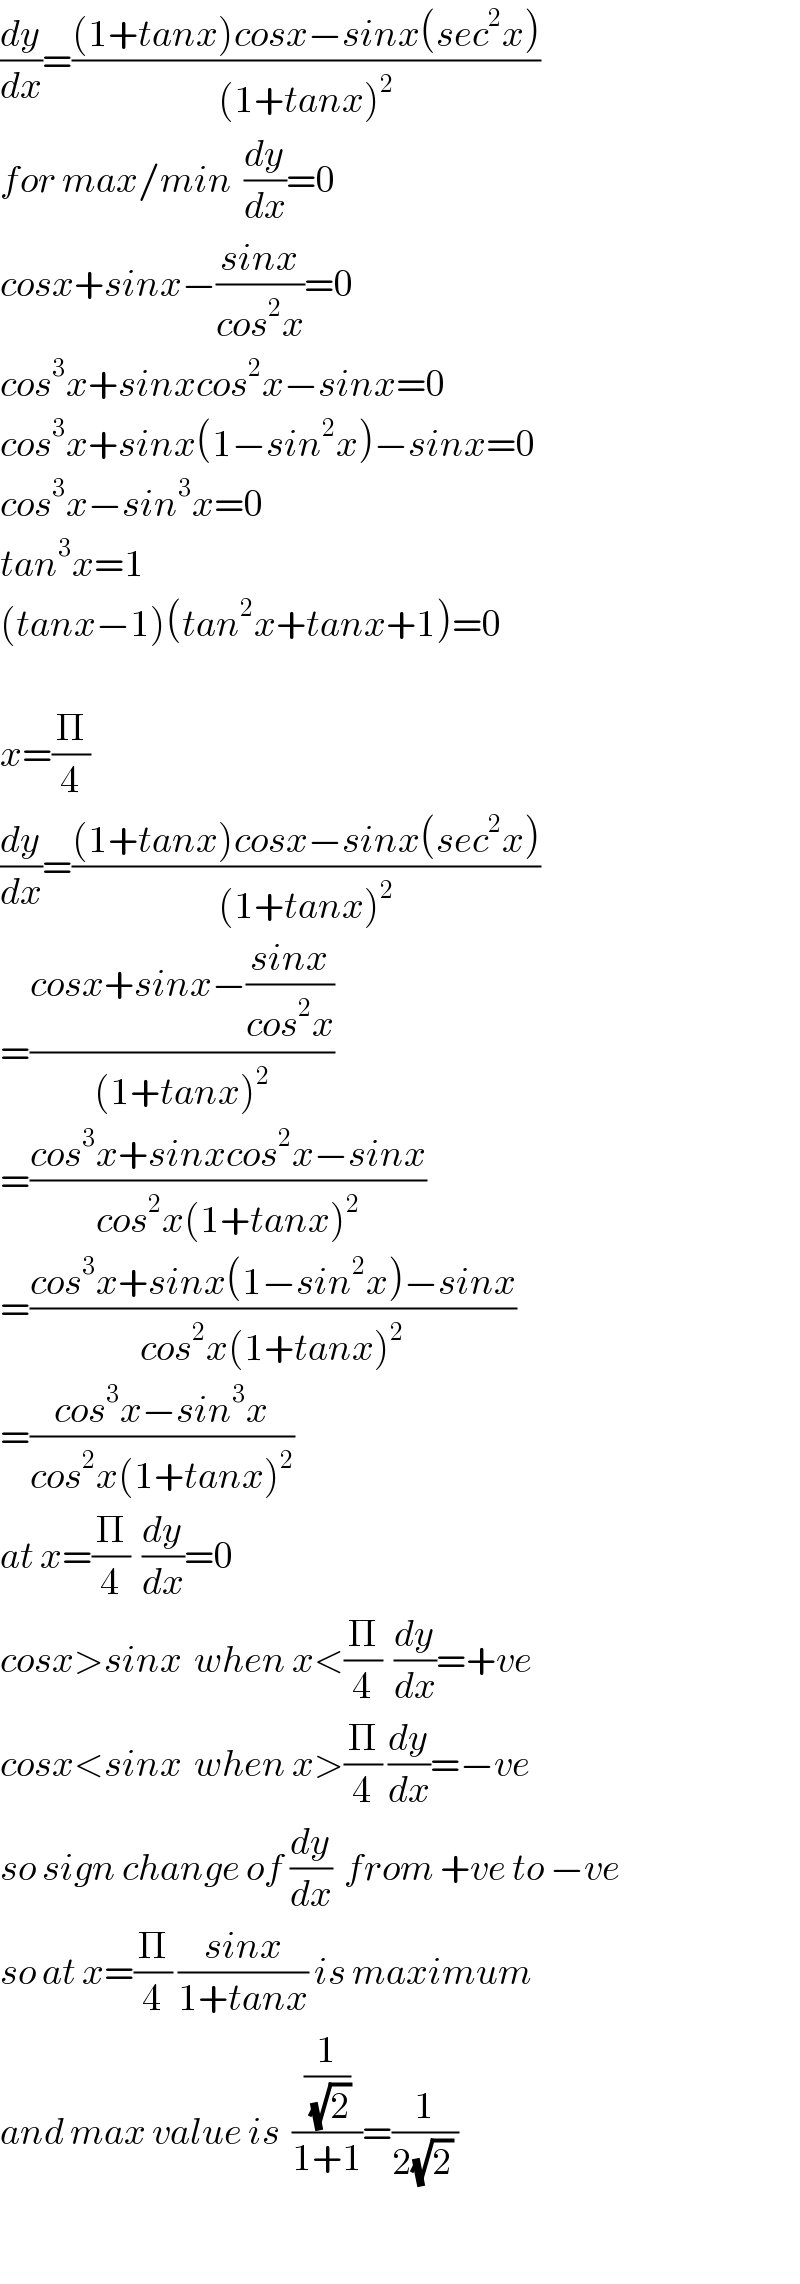 (dy/dx)=(((1+tanx)cosx−sinx(sec^2 x))/((1+tanx)^2 ))  for max/min  (dy/dx)=0  cosx+sinx−((sinx)/(cos^2 x))=0  cos^3 x+sinxcos^2 x−sinx=0  cos^3 x+sinx(1−sin^2 x)−sinx=0  cos^3 x−sin^3 x=0  tan^3 x=1  (tanx−1)(tan^2 x+tanx+1)=0    x=(Π/4)  (dy/dx)=(((1+tanx)cosx−sinx(sec^2 x))/((1+tanx)^2 ))  =((cosx+sinx−((sinx)/(cos^2 x)))/((1+tanx)^2 ))  =((cos^3 x+sinxcos^2 x−sinx)/(cos^2 x(1+tanx)^2 ))  =((cos^3 x+sinx(1−sin^2 x)−sinx)/(cos^2 x(1+tanx)^2 ))  =((cos^3 x−sin^3 x)/(cos^2 x(1+tanx)^2 ))  at x=(Π/4)  (dy/dx)=0  cosx>sinx  when x<(Π/4)  (dy/dx)=+ve  cosx<sinx  when x>(Π/4) (dy/dx)=−ve  so sign change of (dy/dx)  from +ve to −ve   so at x=(Π/4) ((sinx)/(1+tanx)) is maximum  and max value is  ((1/(√2))/(1+1))=(1/(2(√2) ))    